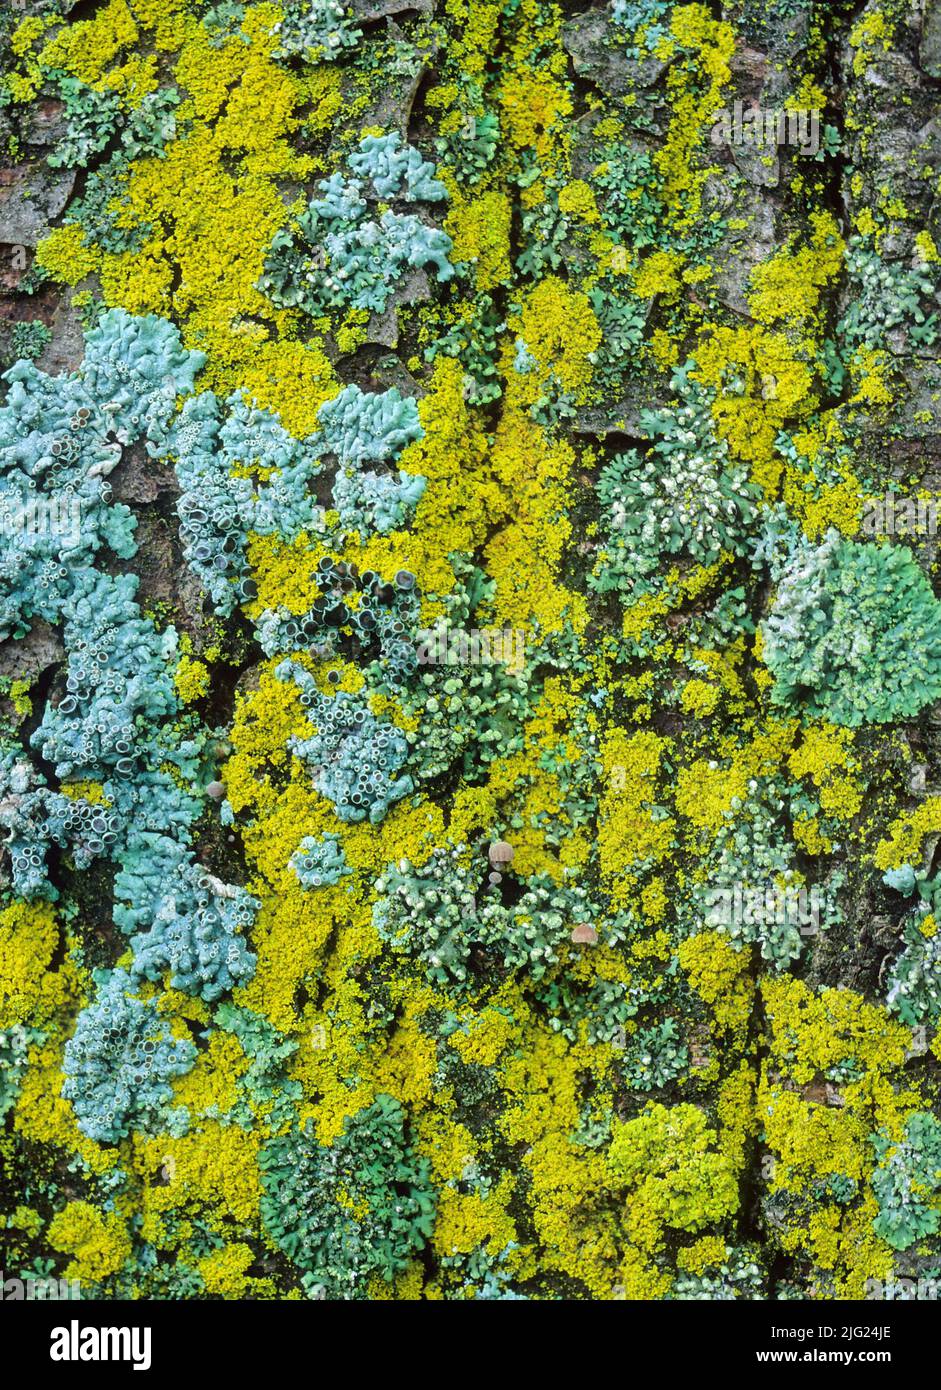 Various kinds of lichen and small mushrooms growing on a tree trunk Stock Photo